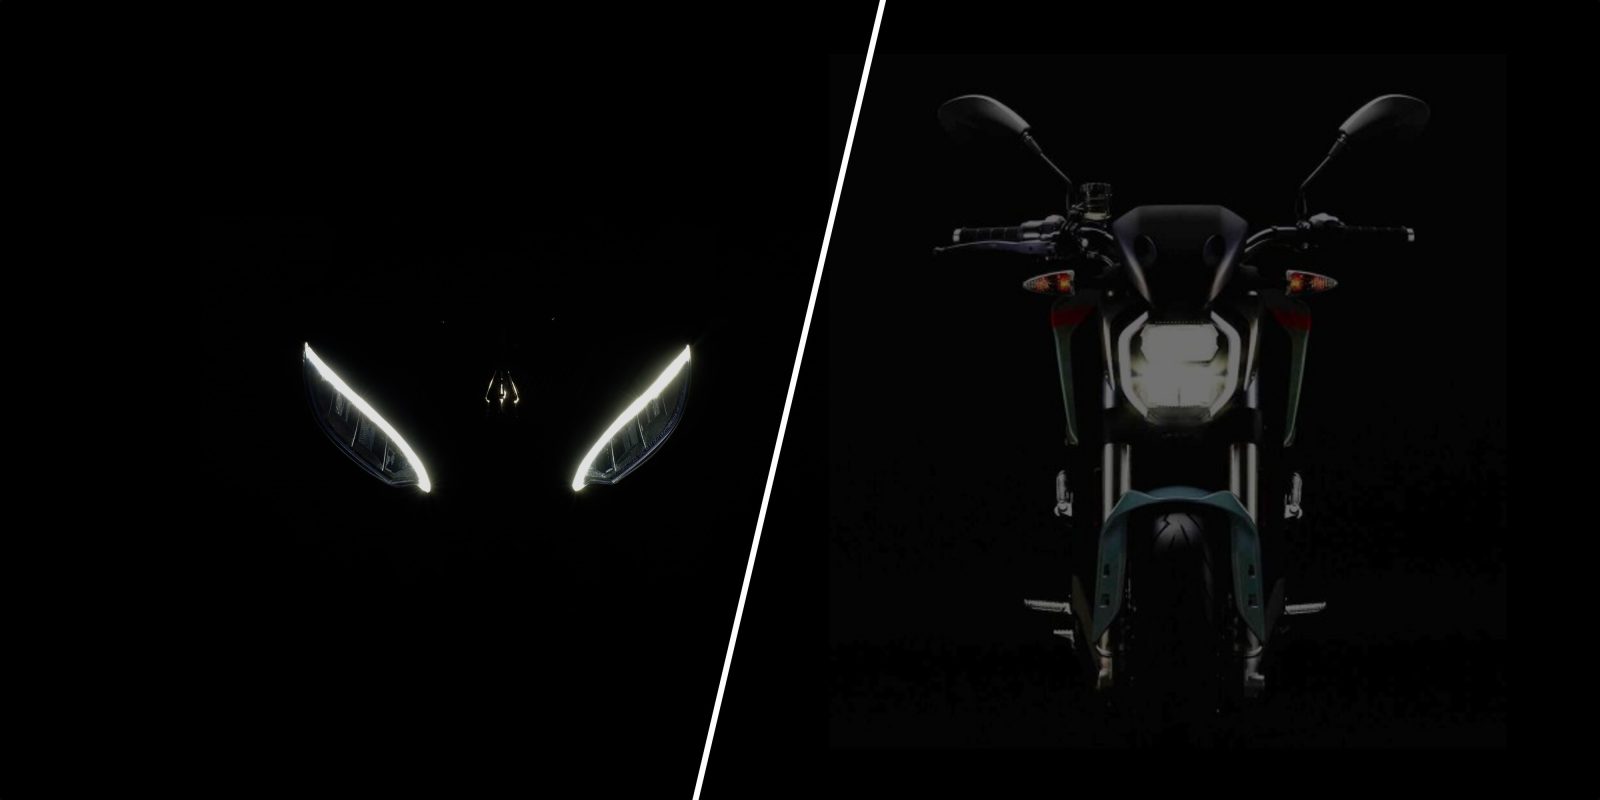 Zero and Lightning electric motorcycles